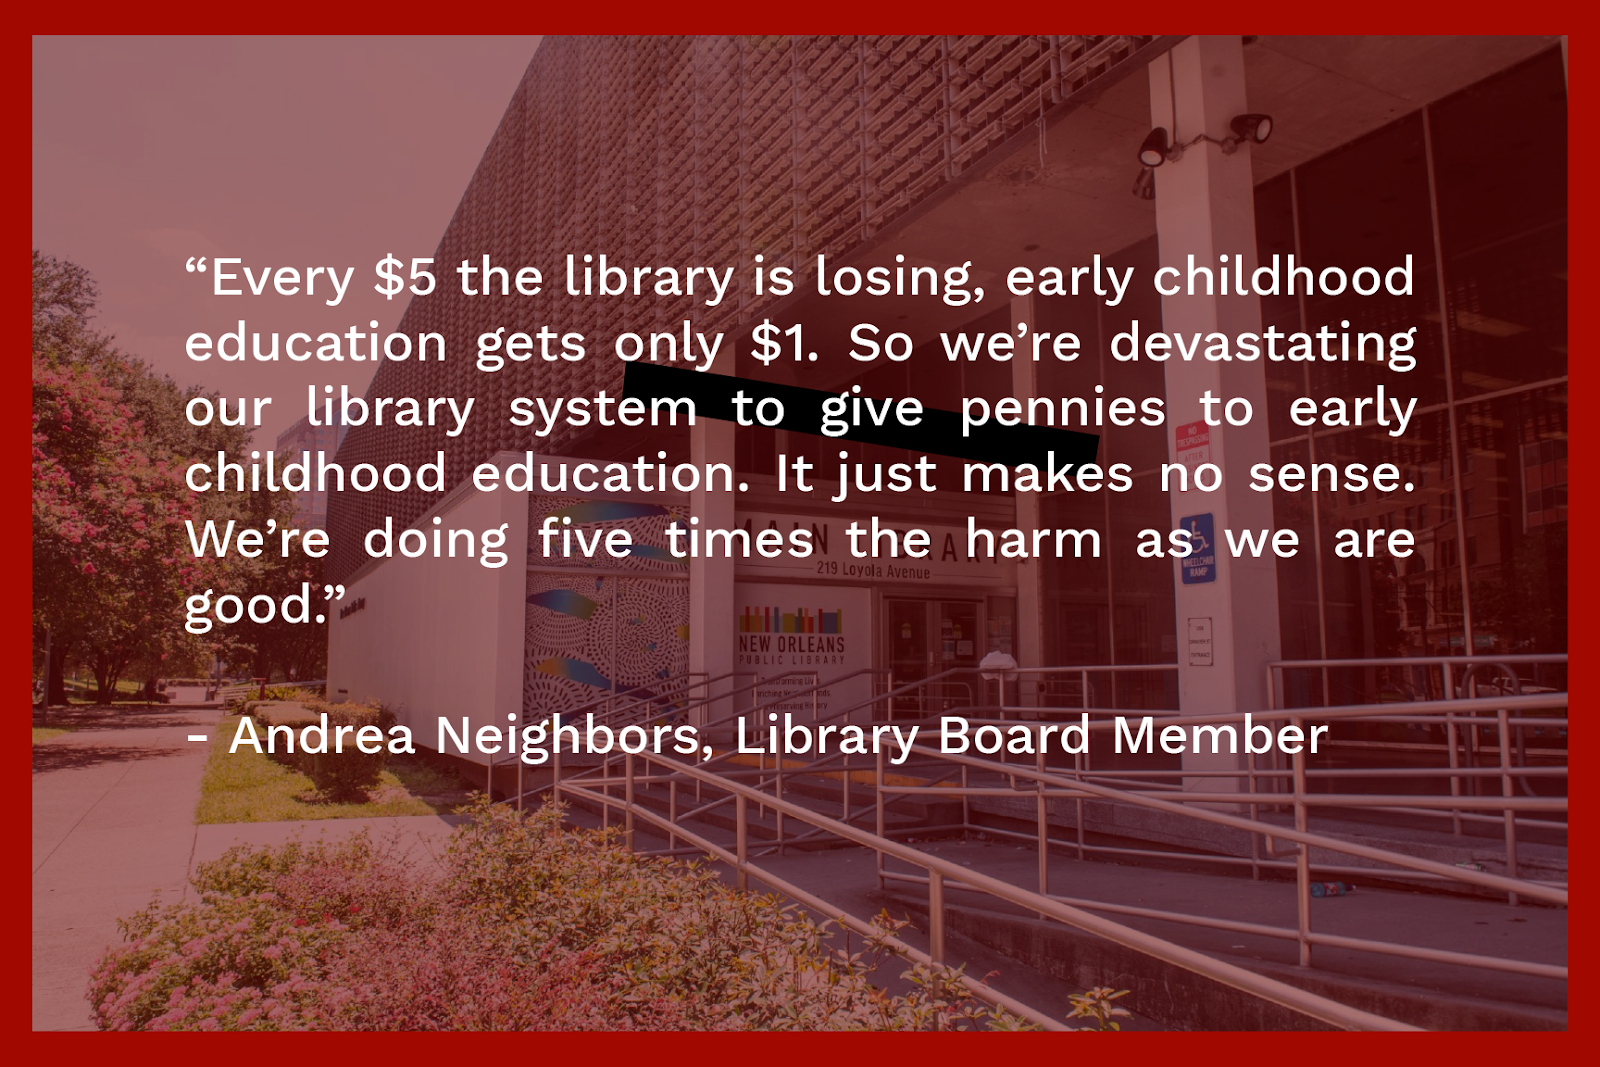 ''Every $5 the library is losing, early childhood education only gets $1. So we're devastating our library system to give pennies to early childhood education. It just makes no sense. We're doing five times the harm as we are good.'' -- Andrea Neighbors, Library Board Member